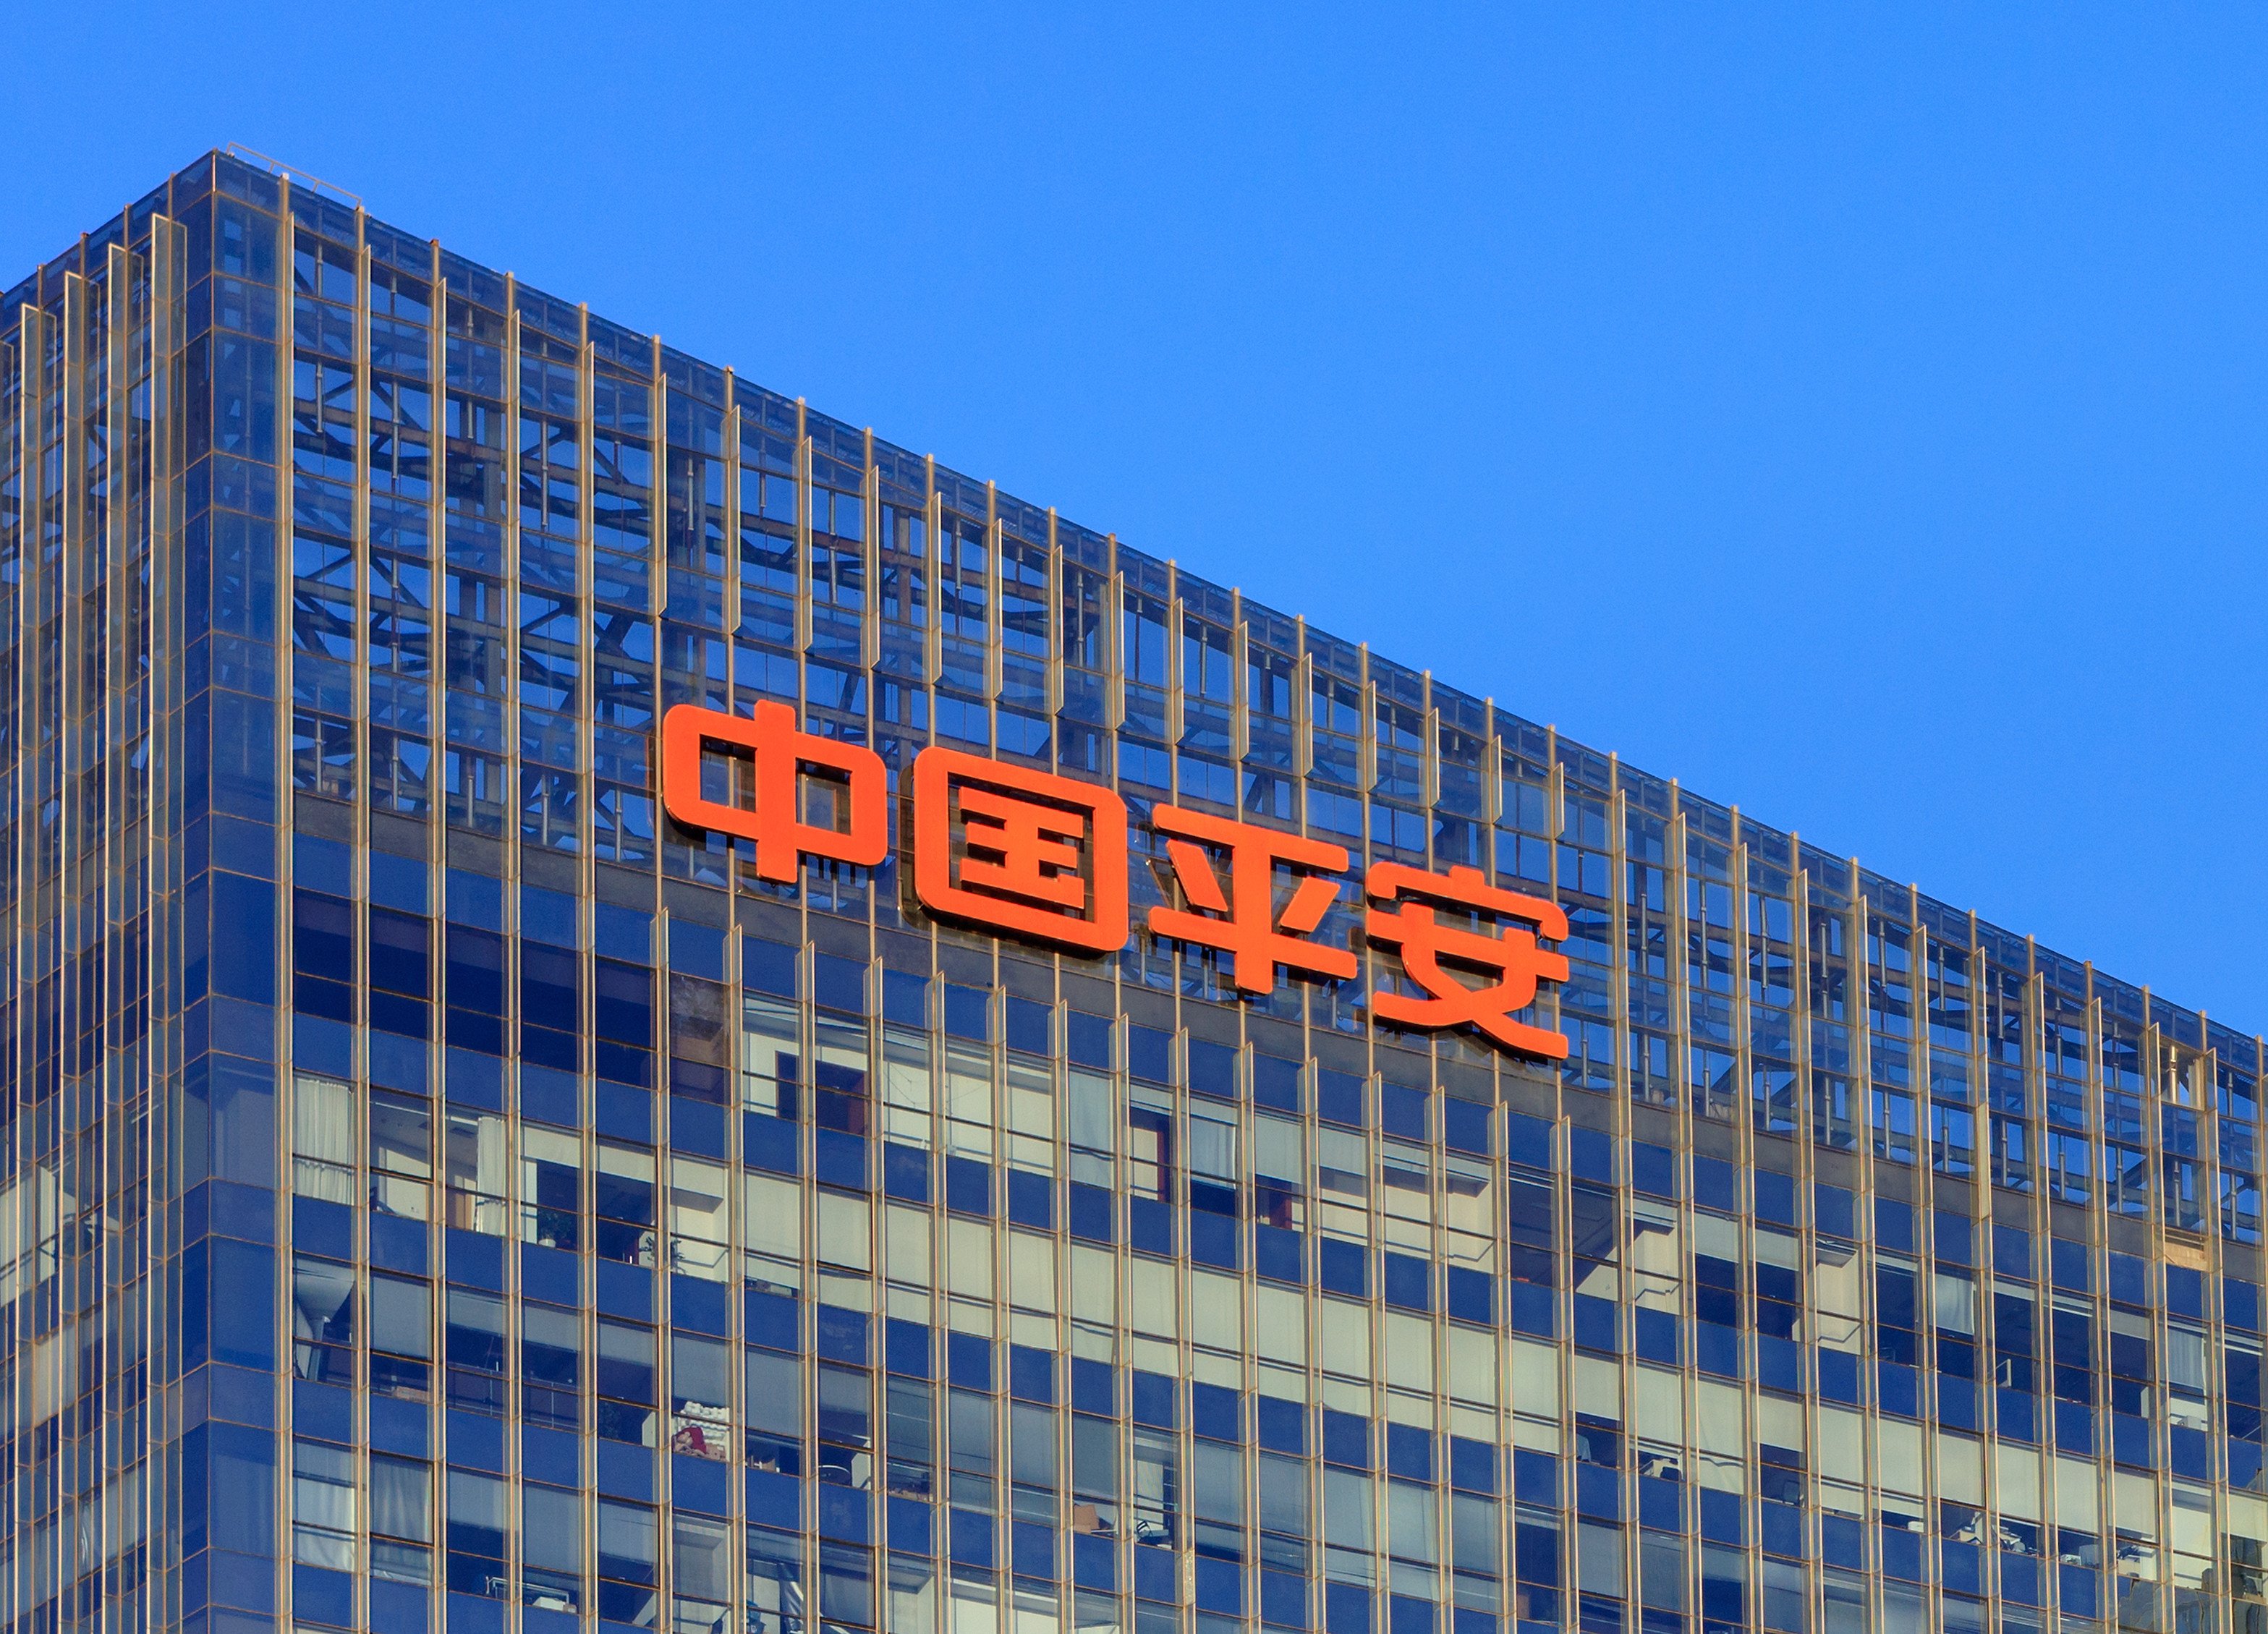 The value of Ping An’s new business in life and health insurance on a like-for-like basis, a key measure of sales and future growth, rose by 36 per cent to 39.26 billion yuan. Photo: Shutterstock